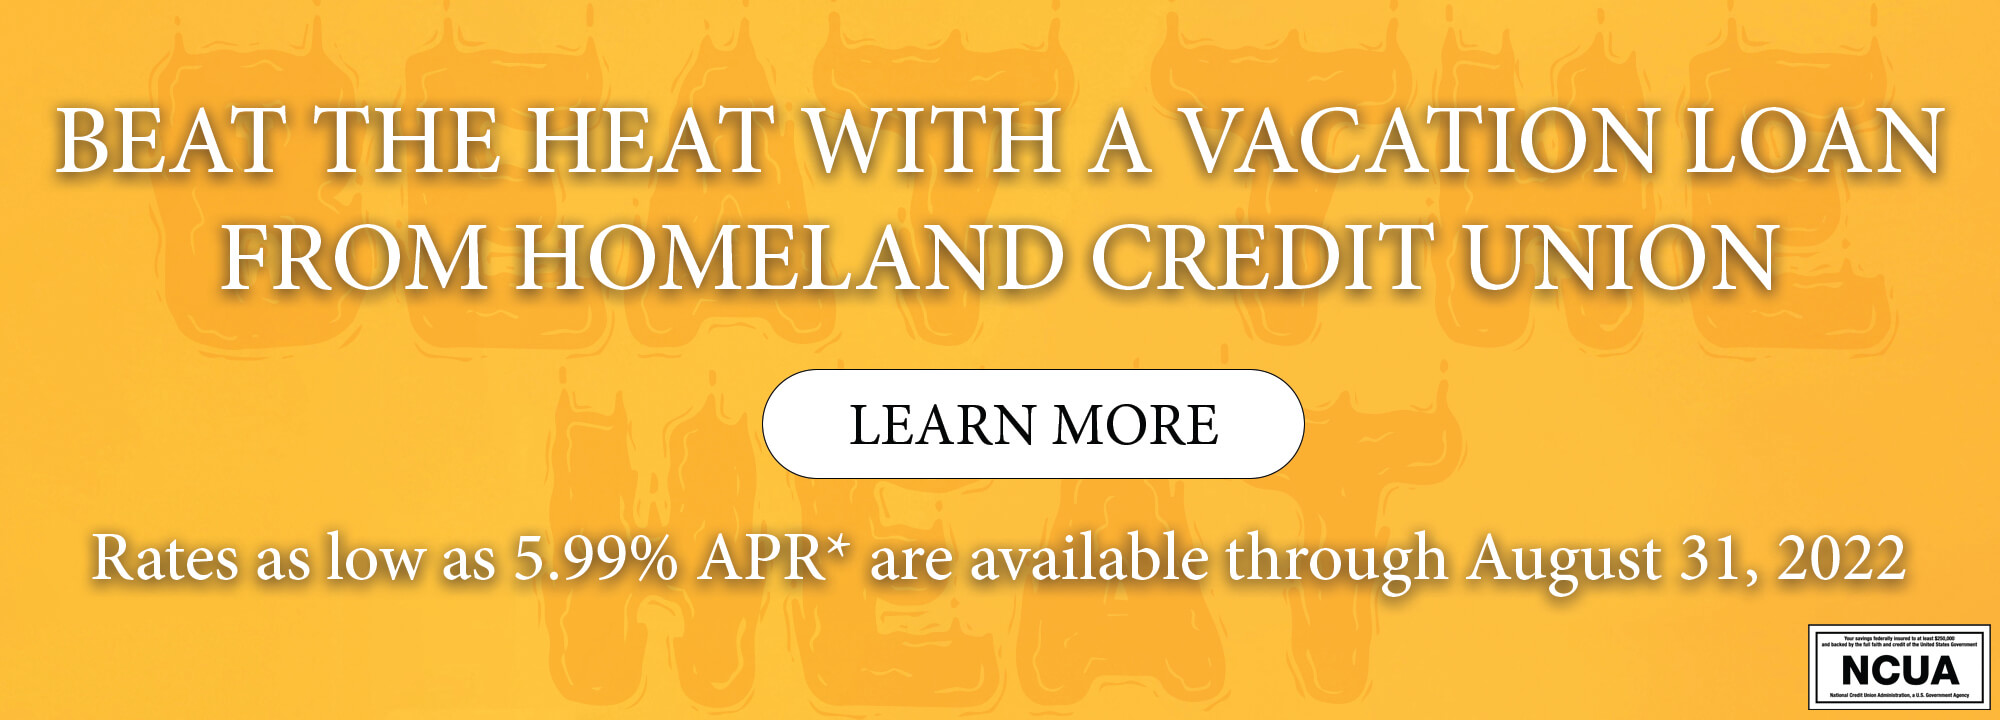 Beat the heat with a vacation loan from Homeland Credit Union. Learn More. Rates as low as 5.99% APR* are available through August 31, 2022